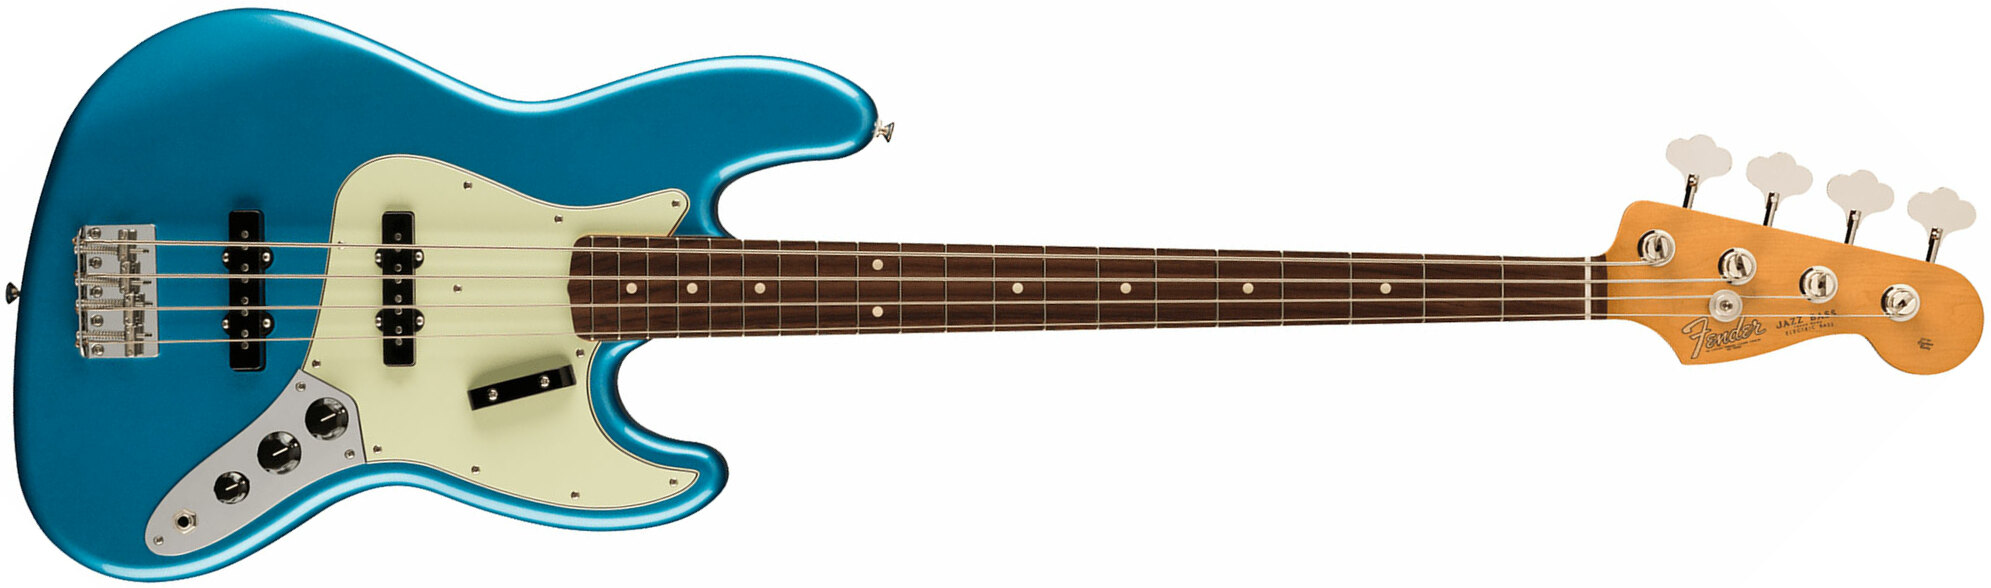 Fender Jazz Bass 60s Vintera Ii Mex Rw - Lake Placid Blue - Solid body electric bass - Main picture